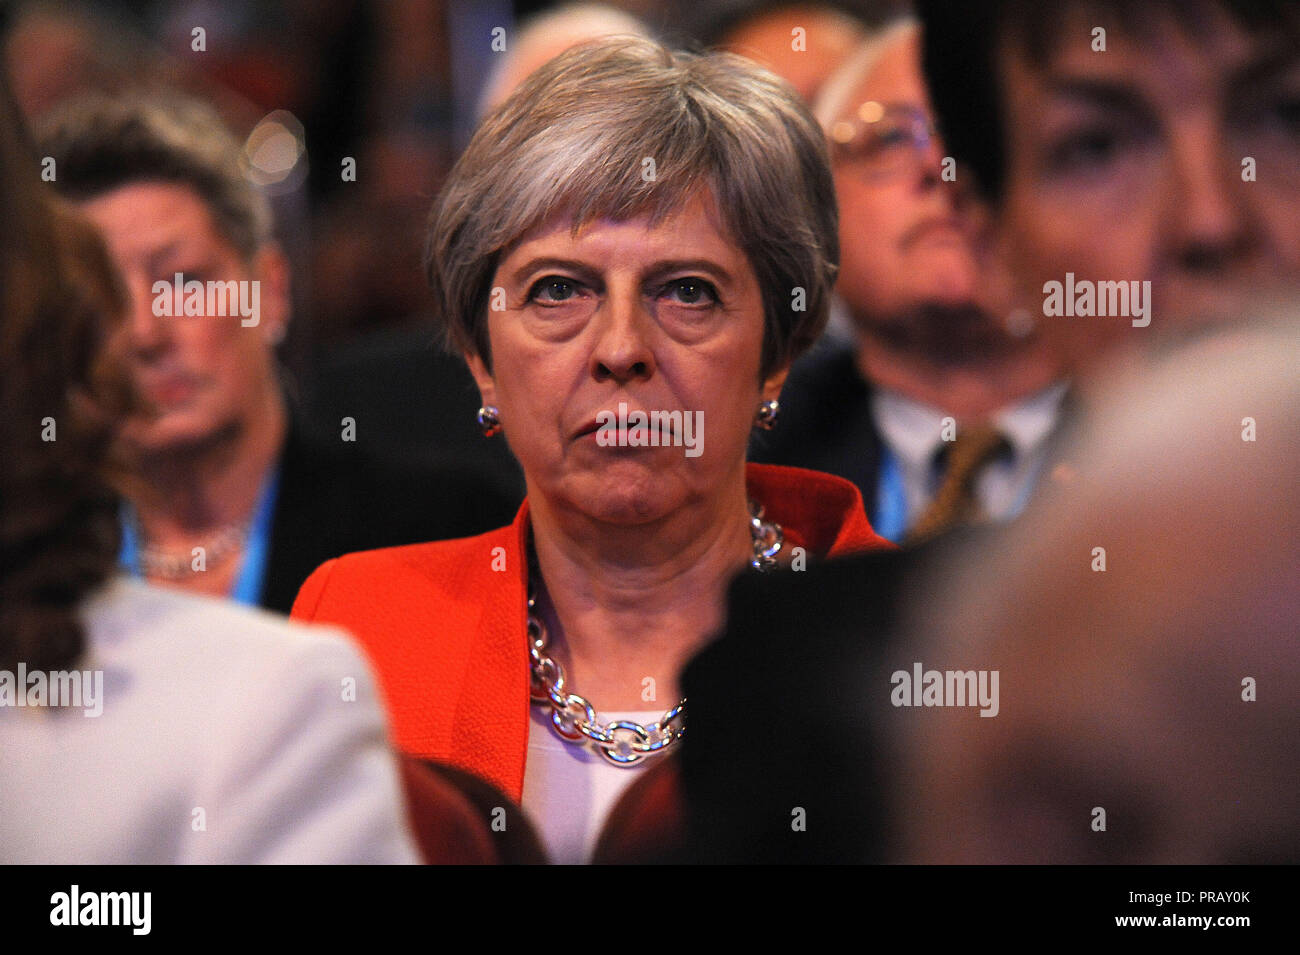 Birmingham, England. 30th September, 2018.  Theresa May MP, Prime Minister and Leader of the Conservative Party, listening to opening speeches to conference on the first session of the first day of the Conservative Party annual conference at the ICC.  Kevin Hayes/Alamy Live News Stock Photo